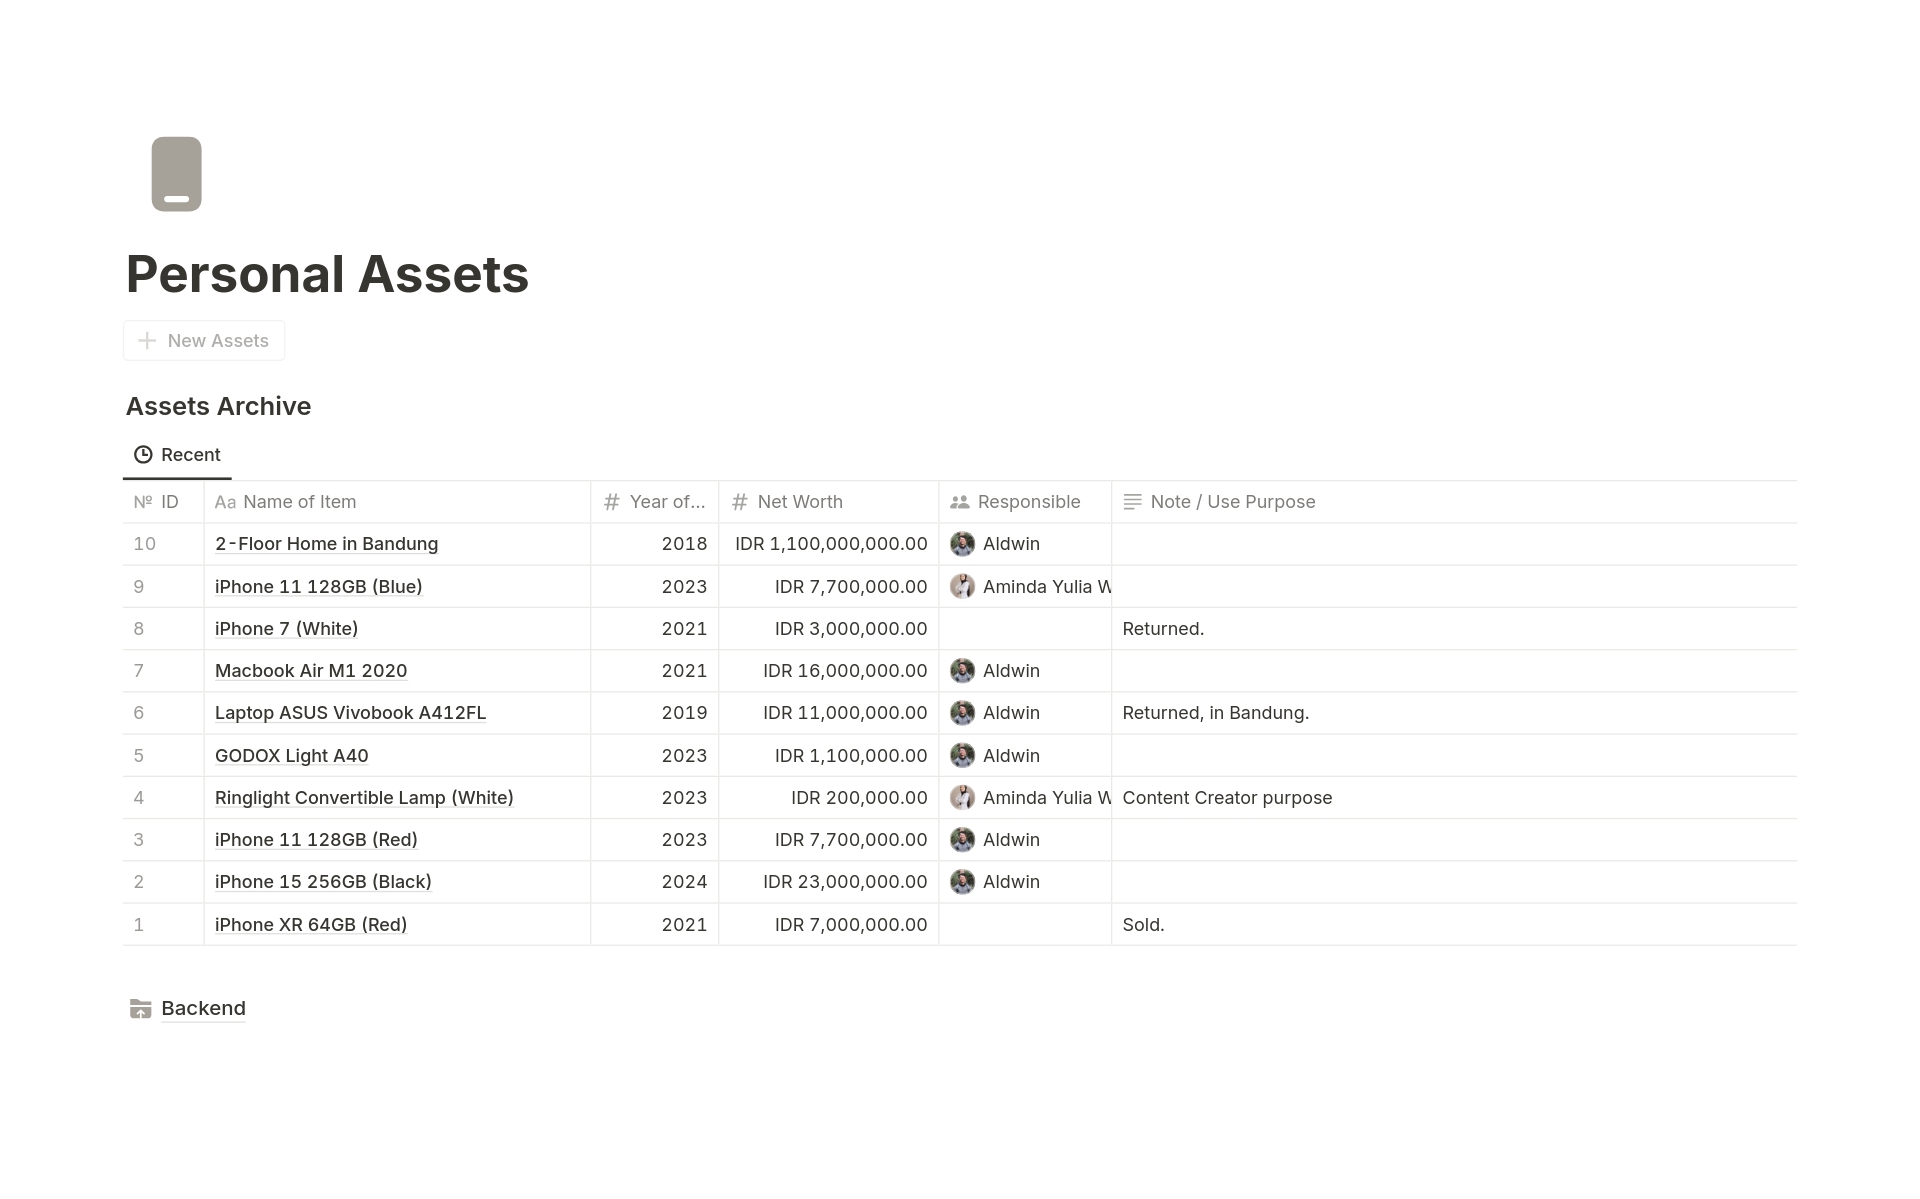 Discover our comprehensive Notion template designed to manage personal assets effortlessly. Track items, net worth,, and specify each asset's purpose with ease. Streamline your belongings today!